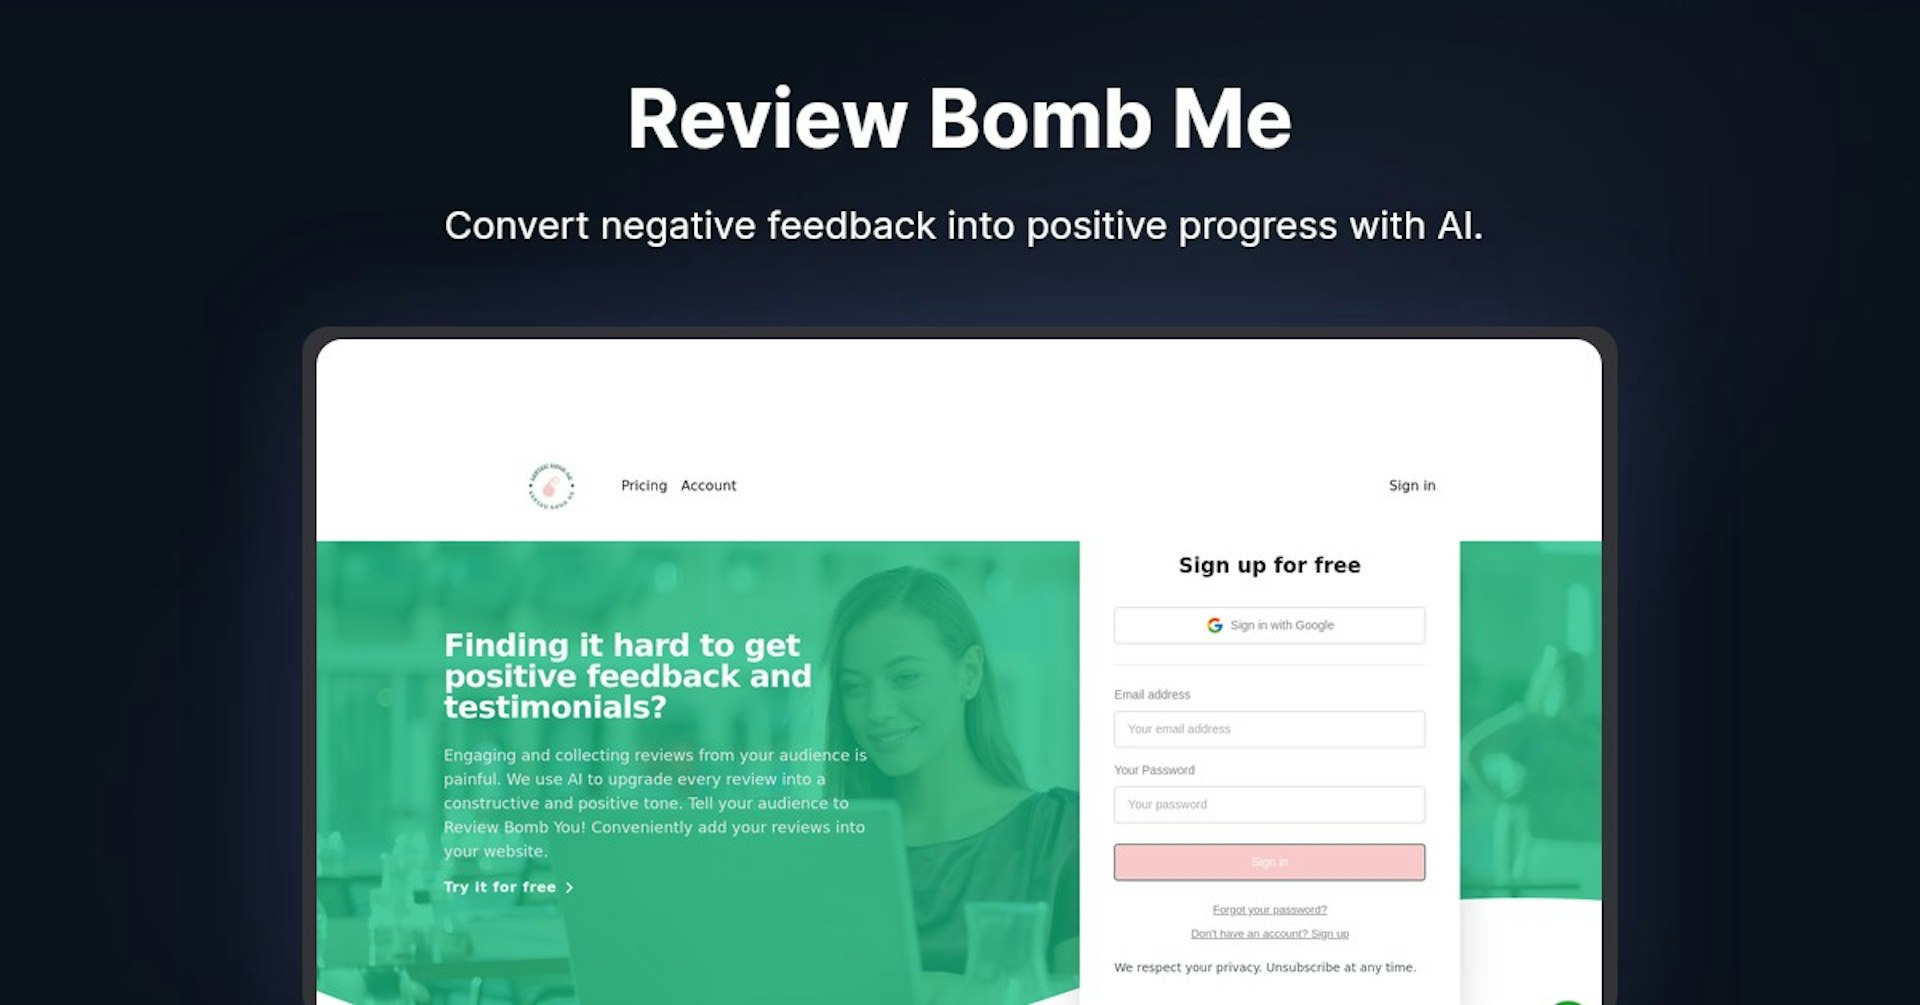 Review Bomb Me